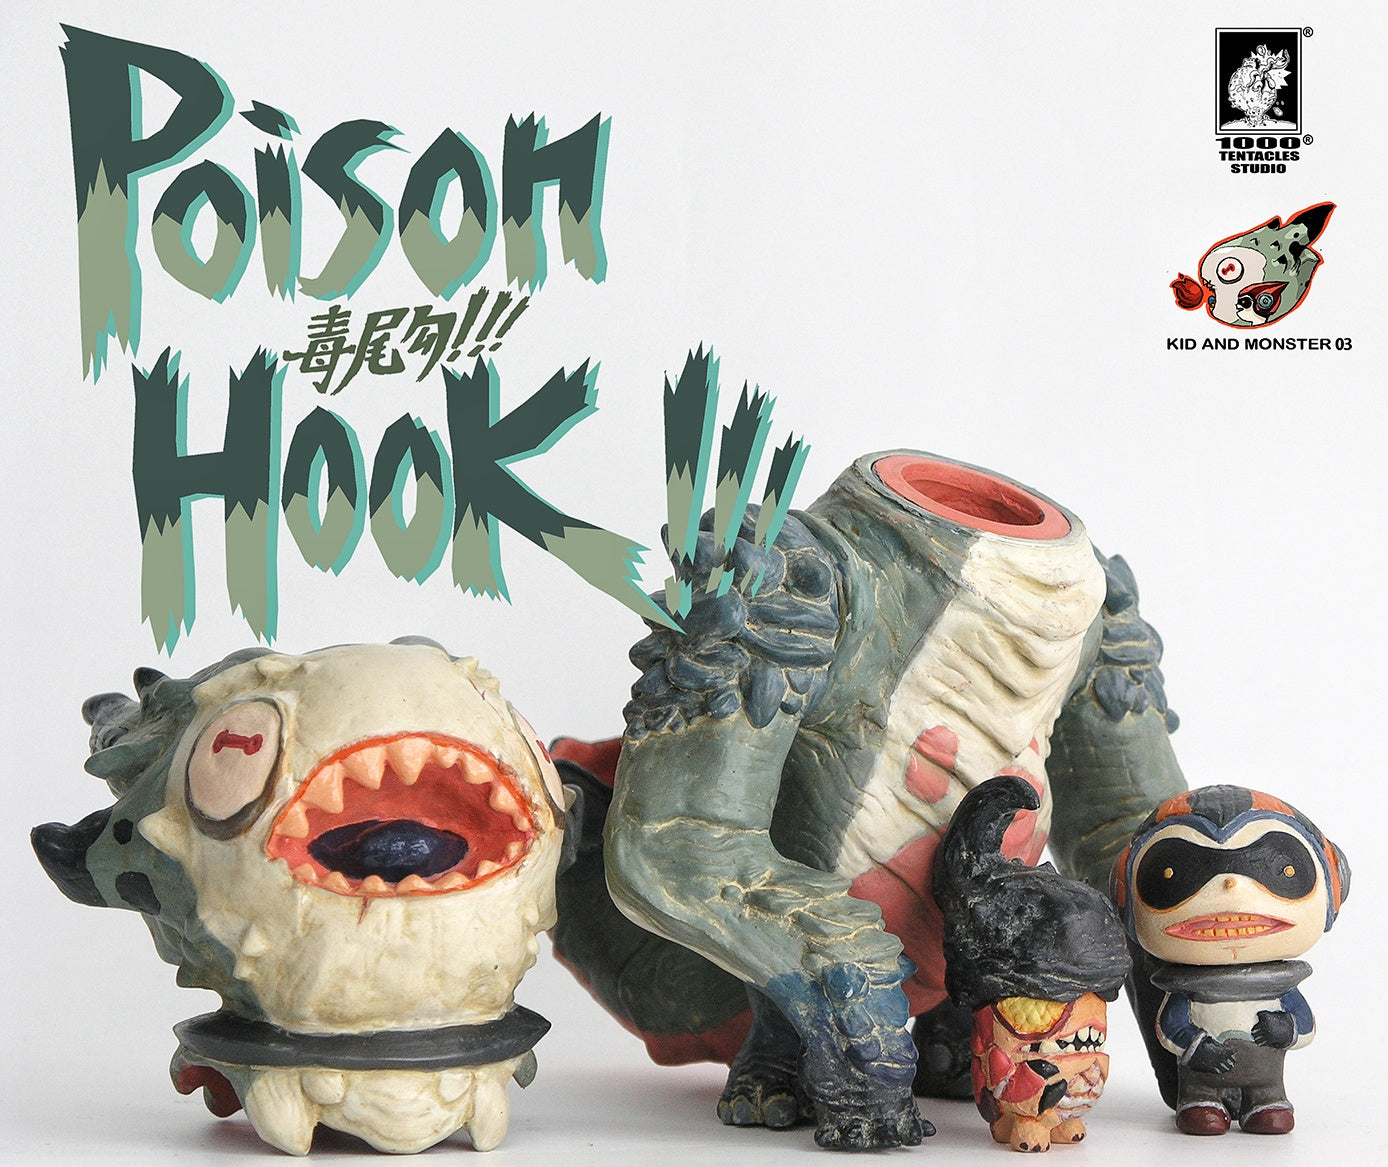 PoisonHook by 1000 Tentacles